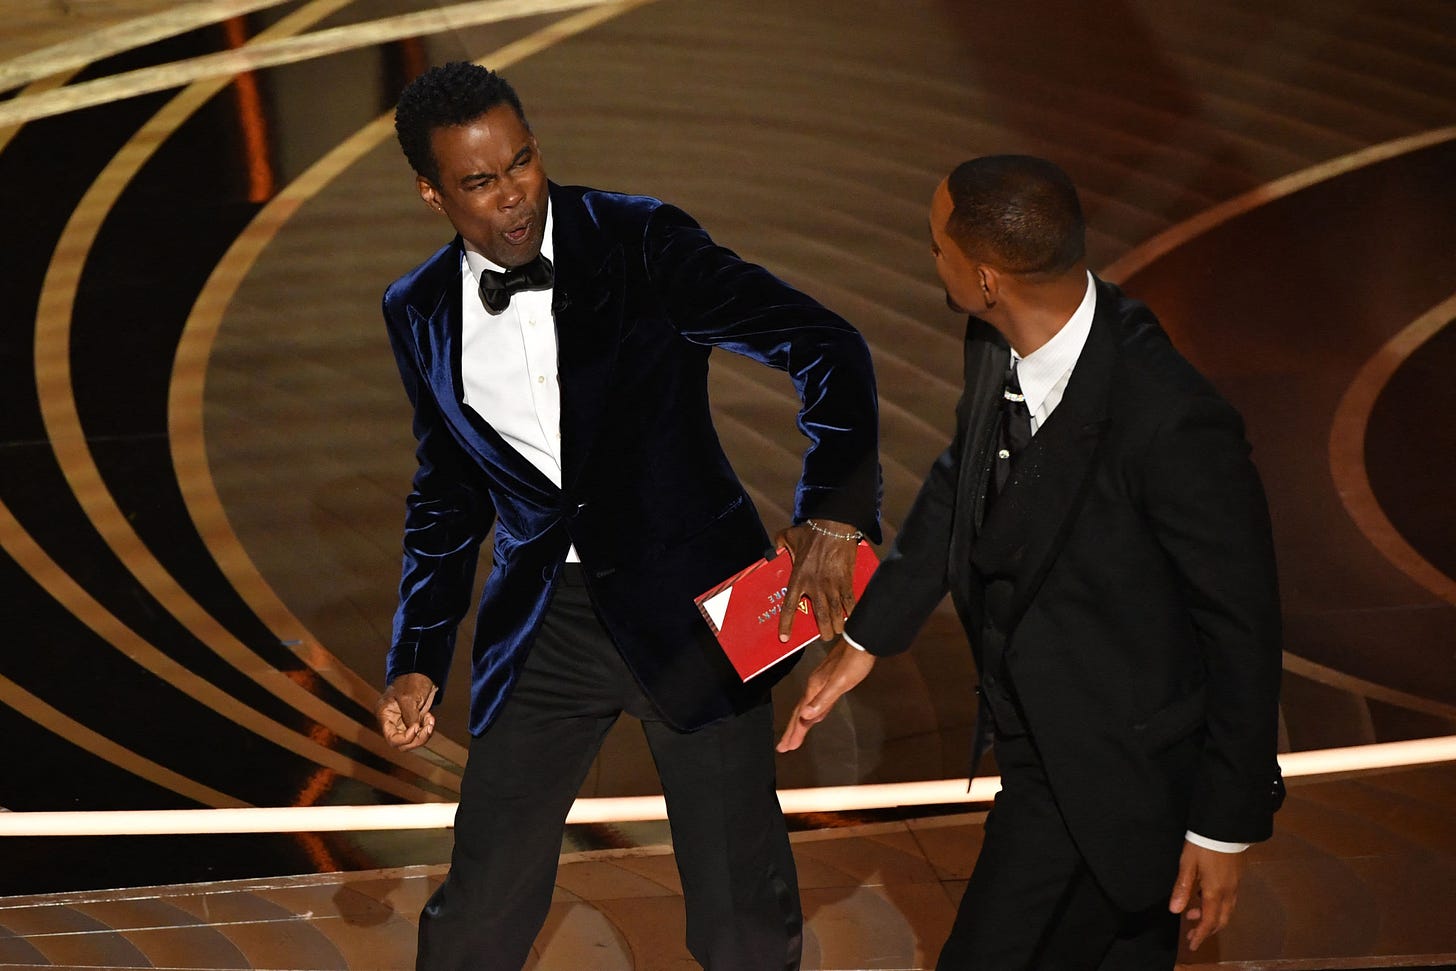 Ceremony bungled even before Will Smith slapped Chris Rock - Damrea